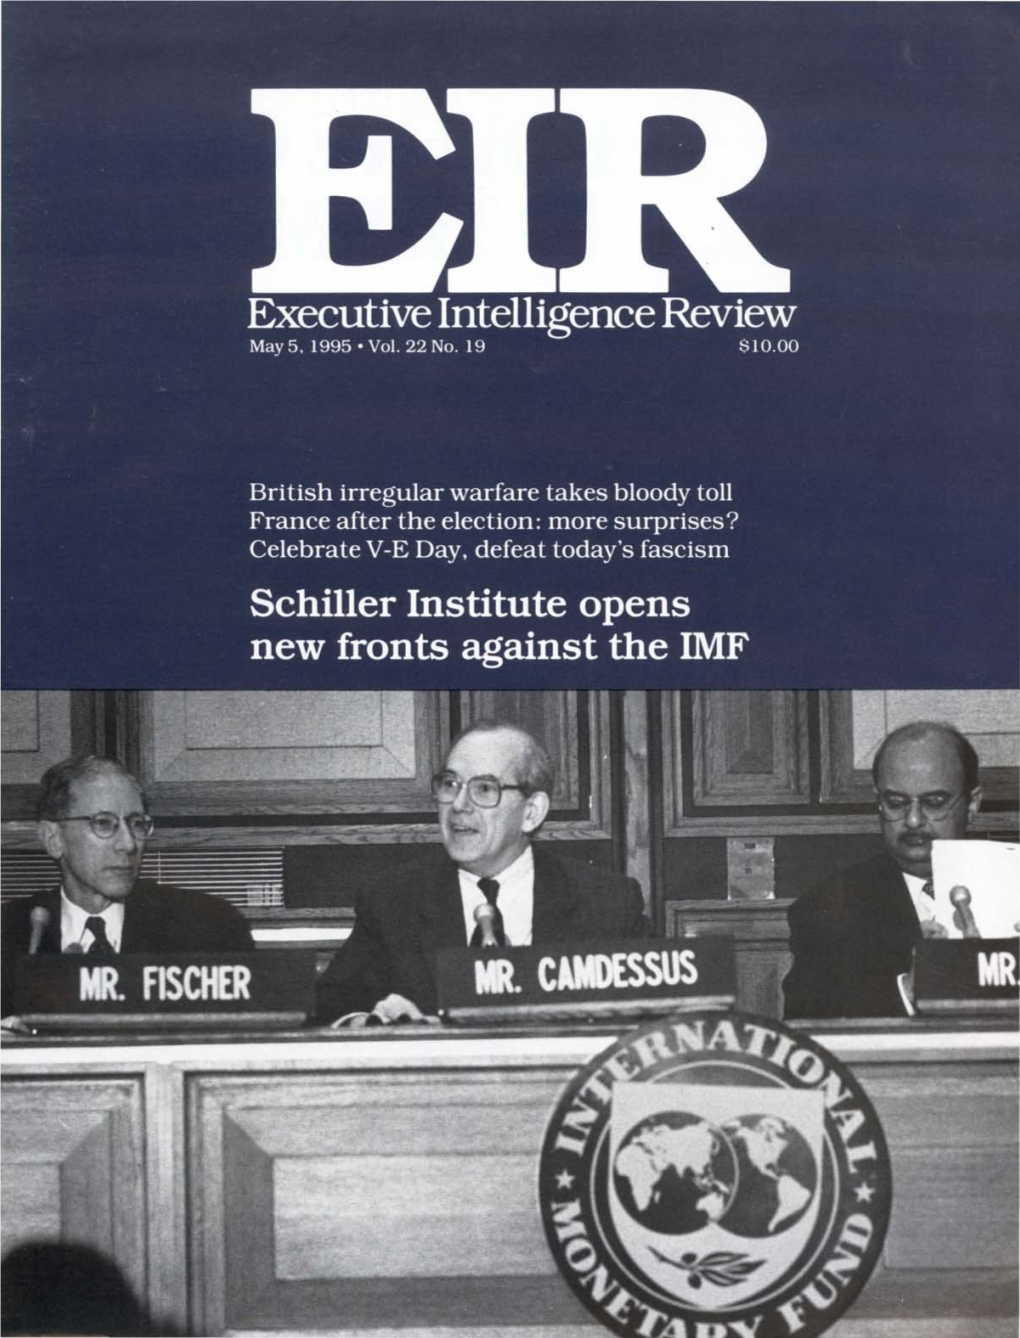 Executive Intelligence Review, Volume 22, Number 19, May 5, 1995